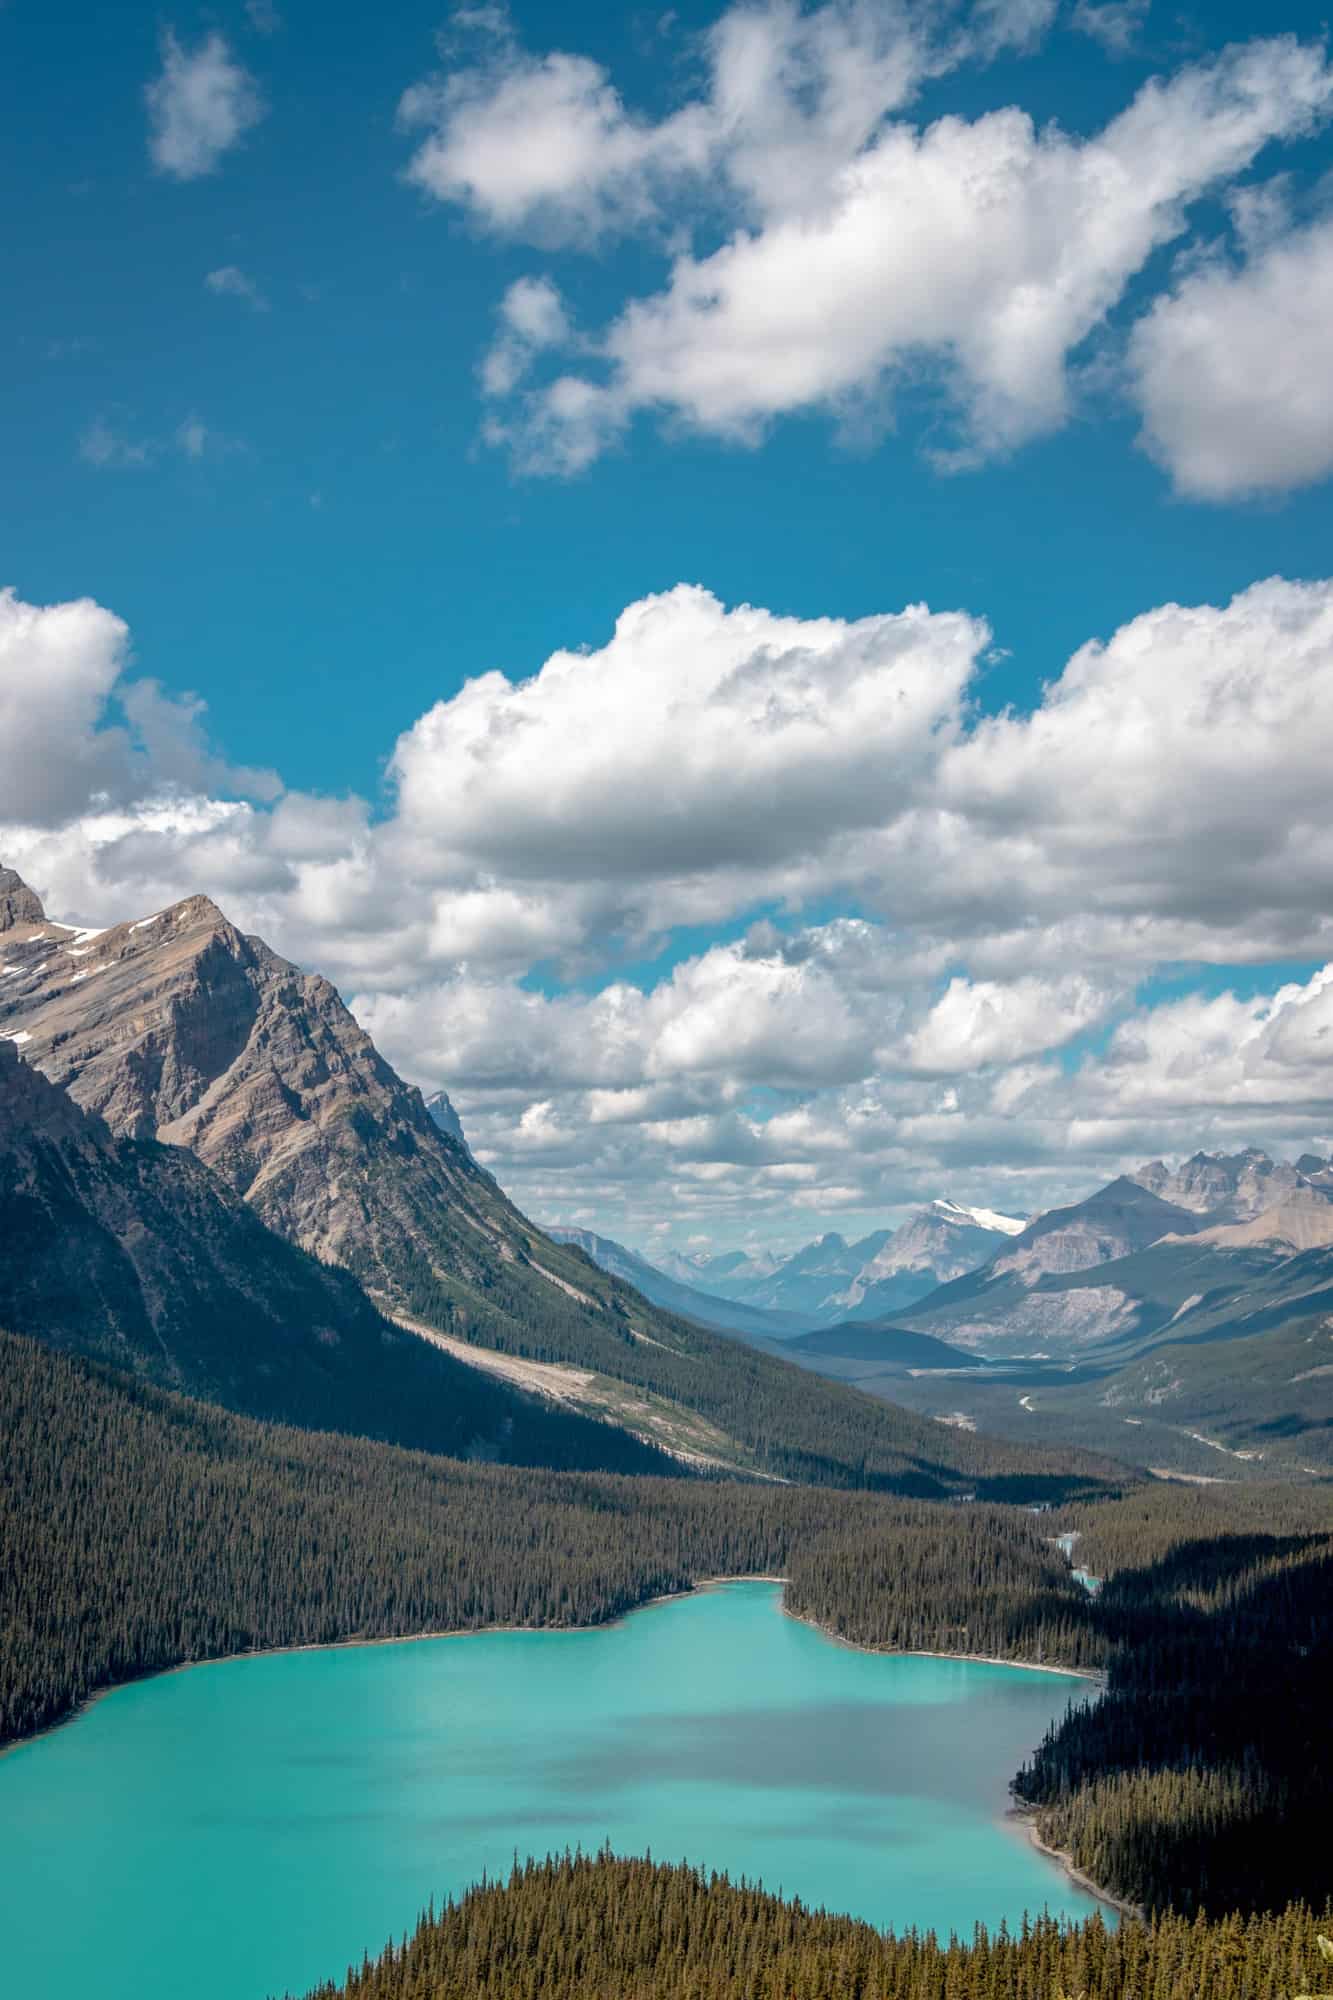 peyto lake as seen from above at one of the famous viewpoints